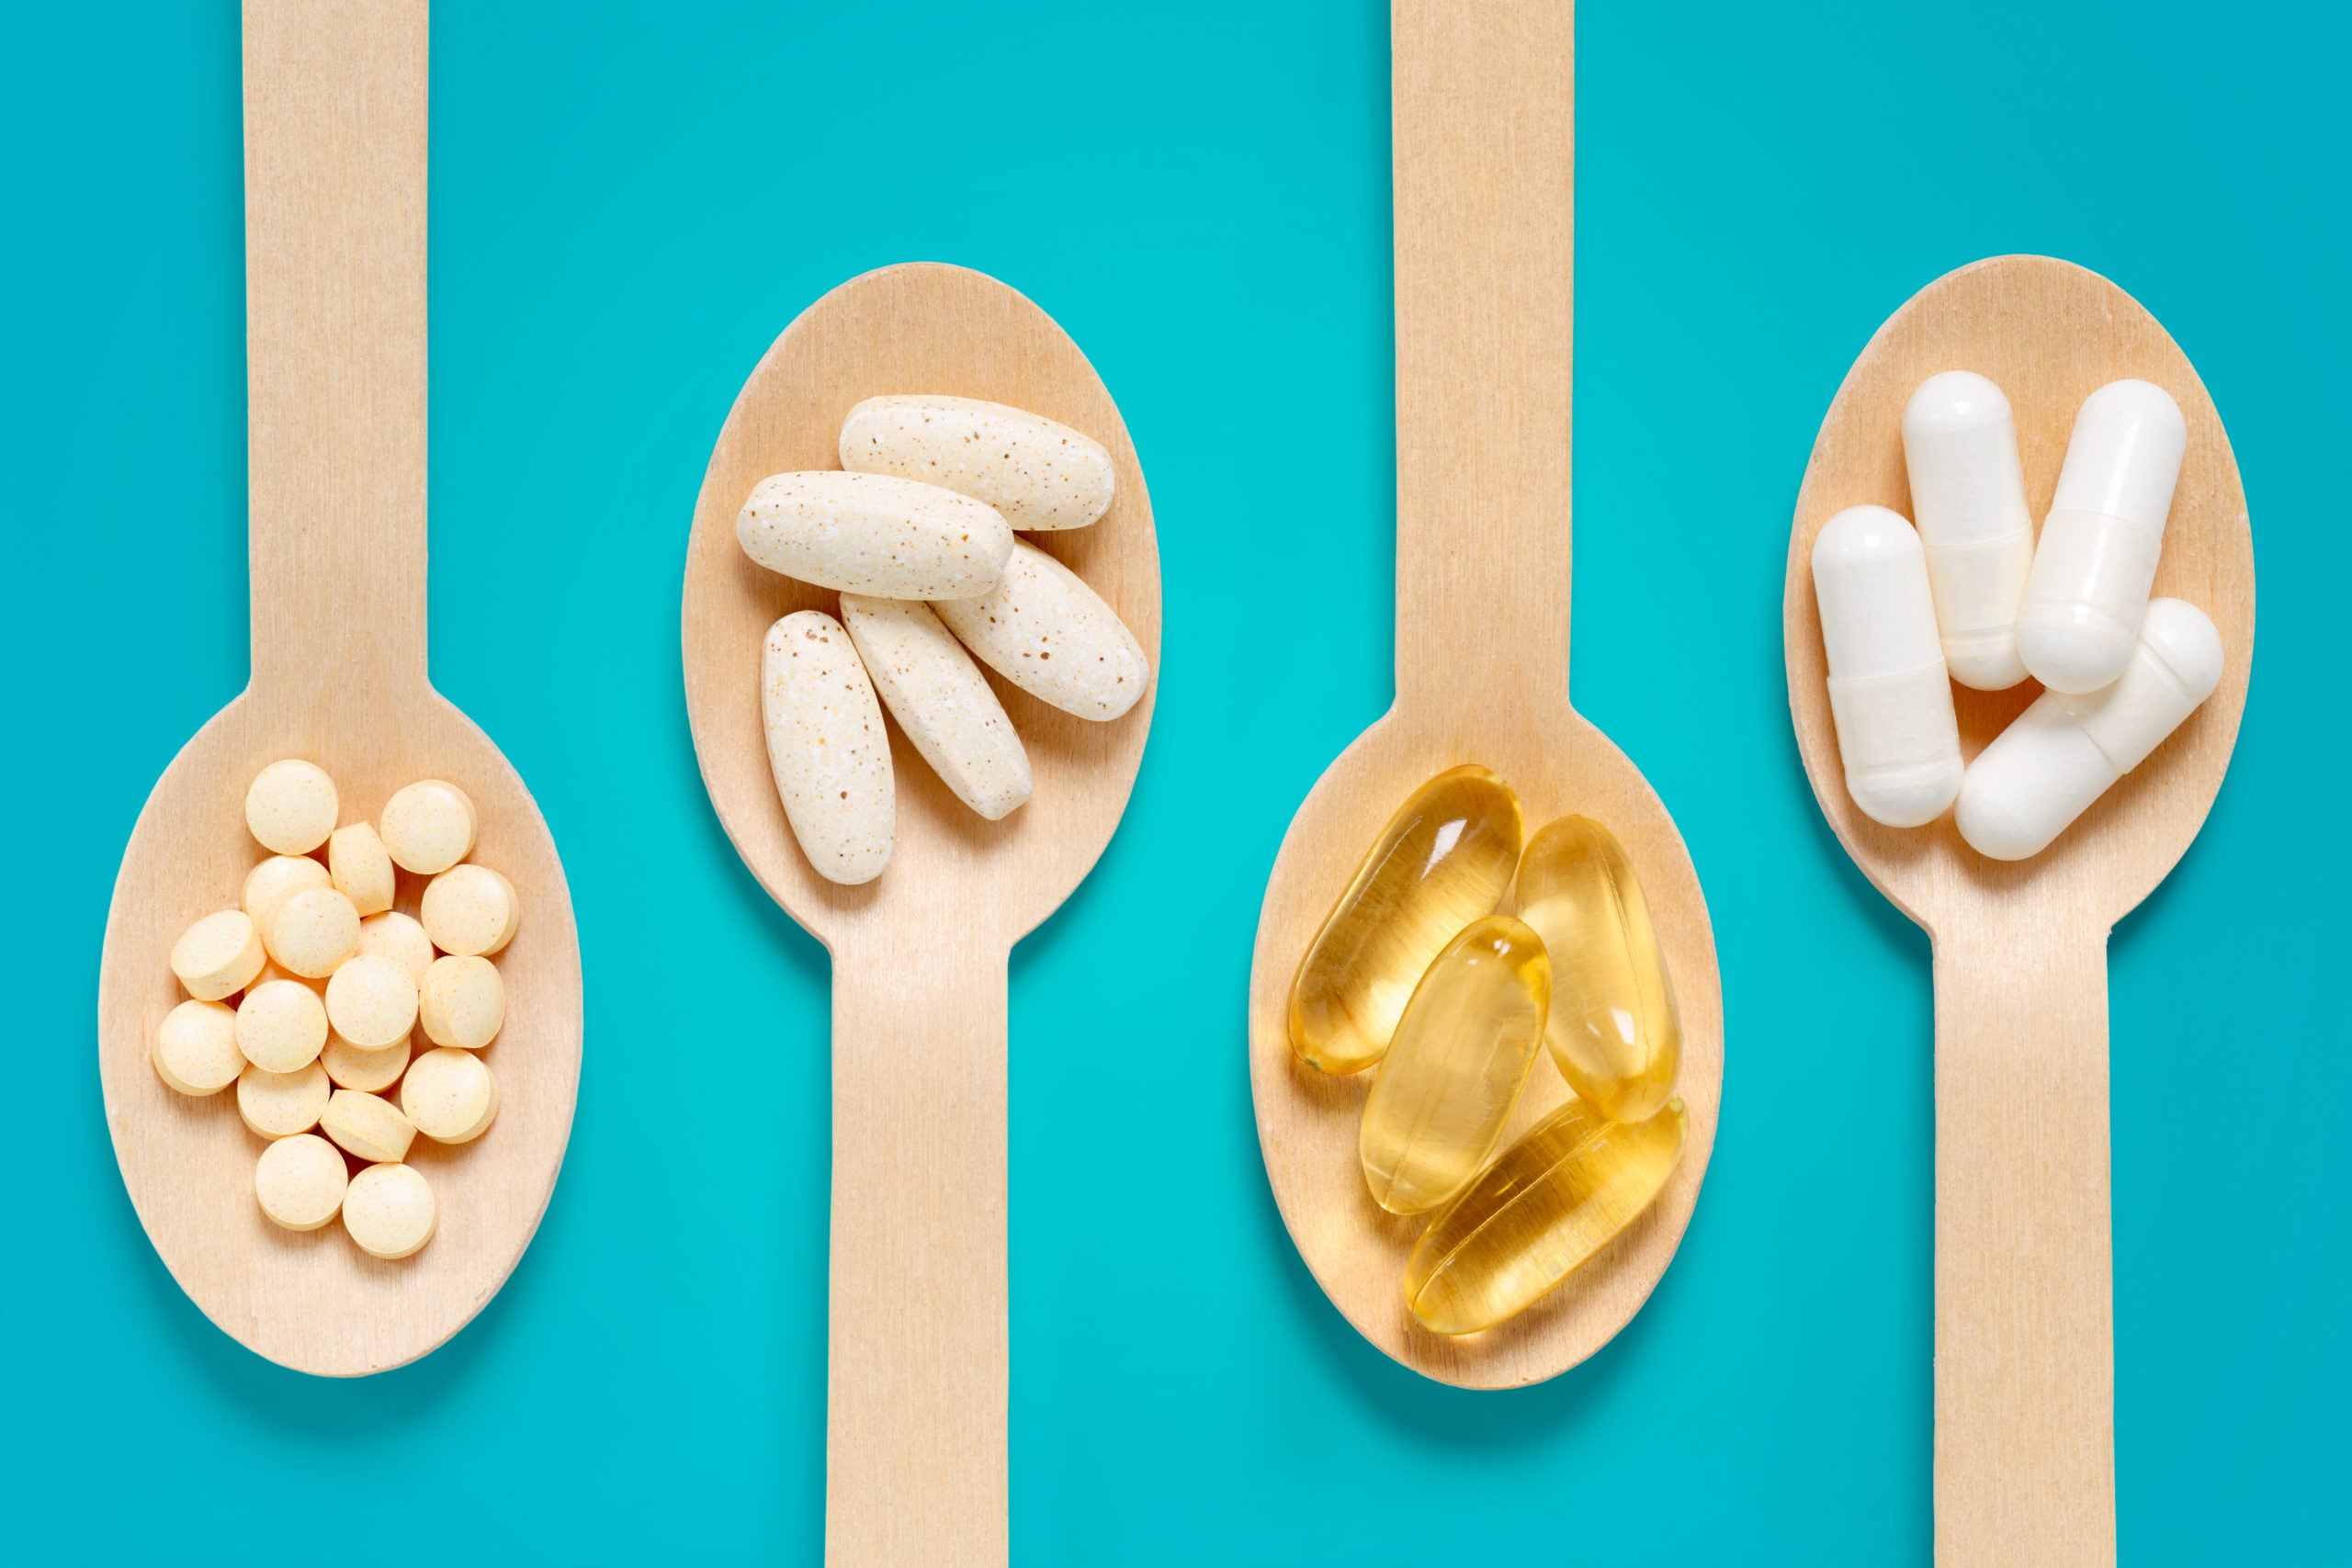 Top 5 Legal Tips for Marketing Dietary Supplements - RM Warner Law |  Online, Marketing, Internet Business Law Firm